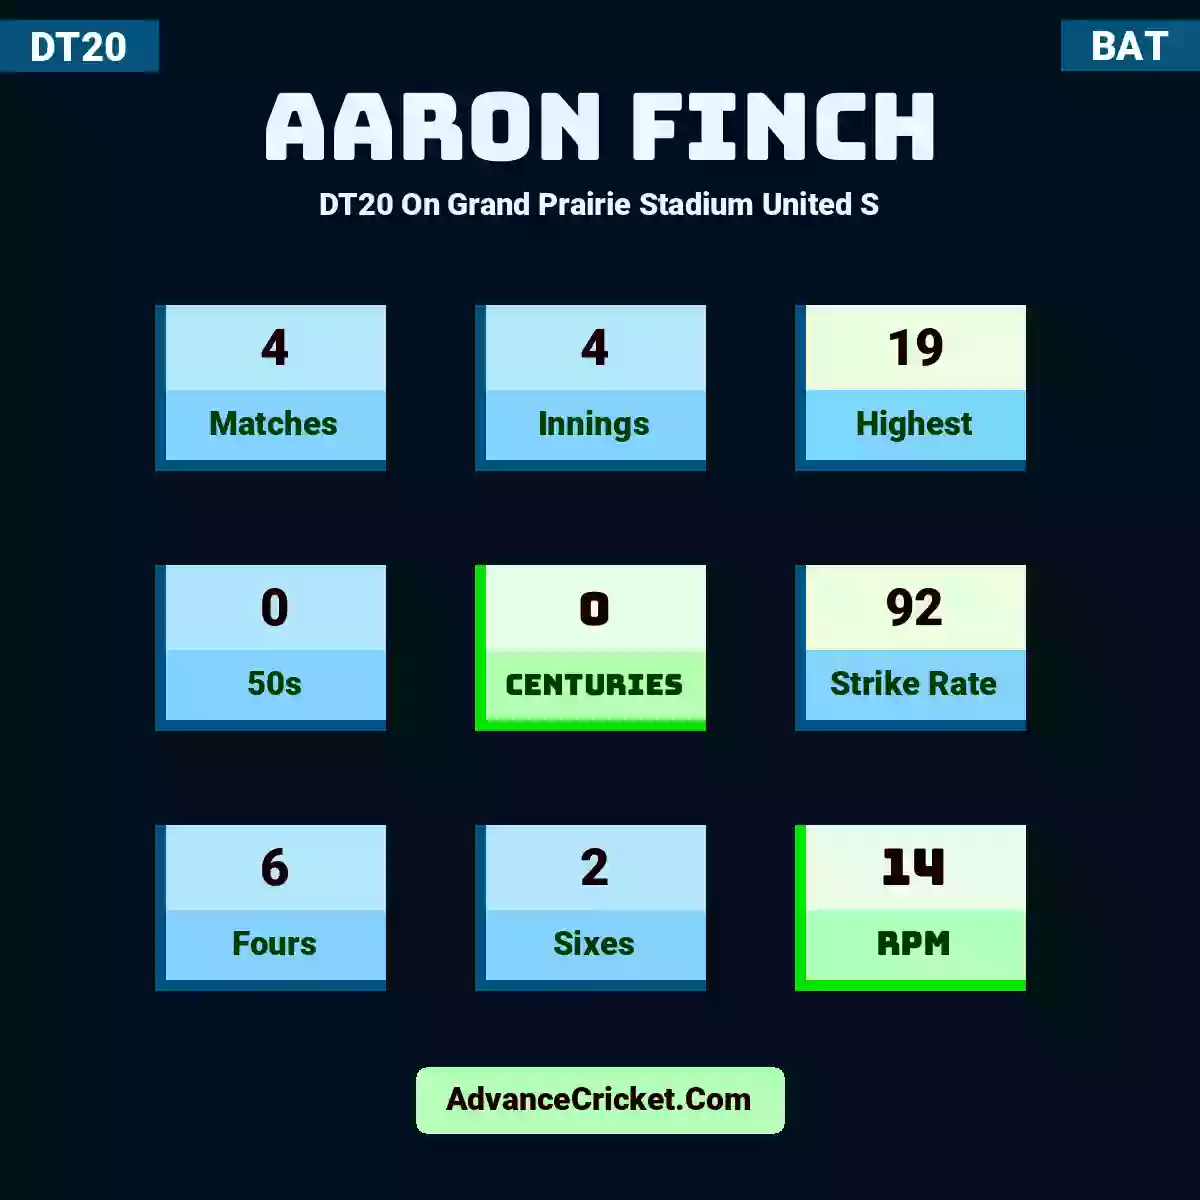 Aaron Finch DT20  On Grand Prairie Stadium United S, Aaron Finch played 4 matches, scored 19 runs as highest, 0 half-centuries, and 0 centuries, with a strike rate of 92. A.Finch hit 6 fours and 2 sixes, with an RPM of 14.